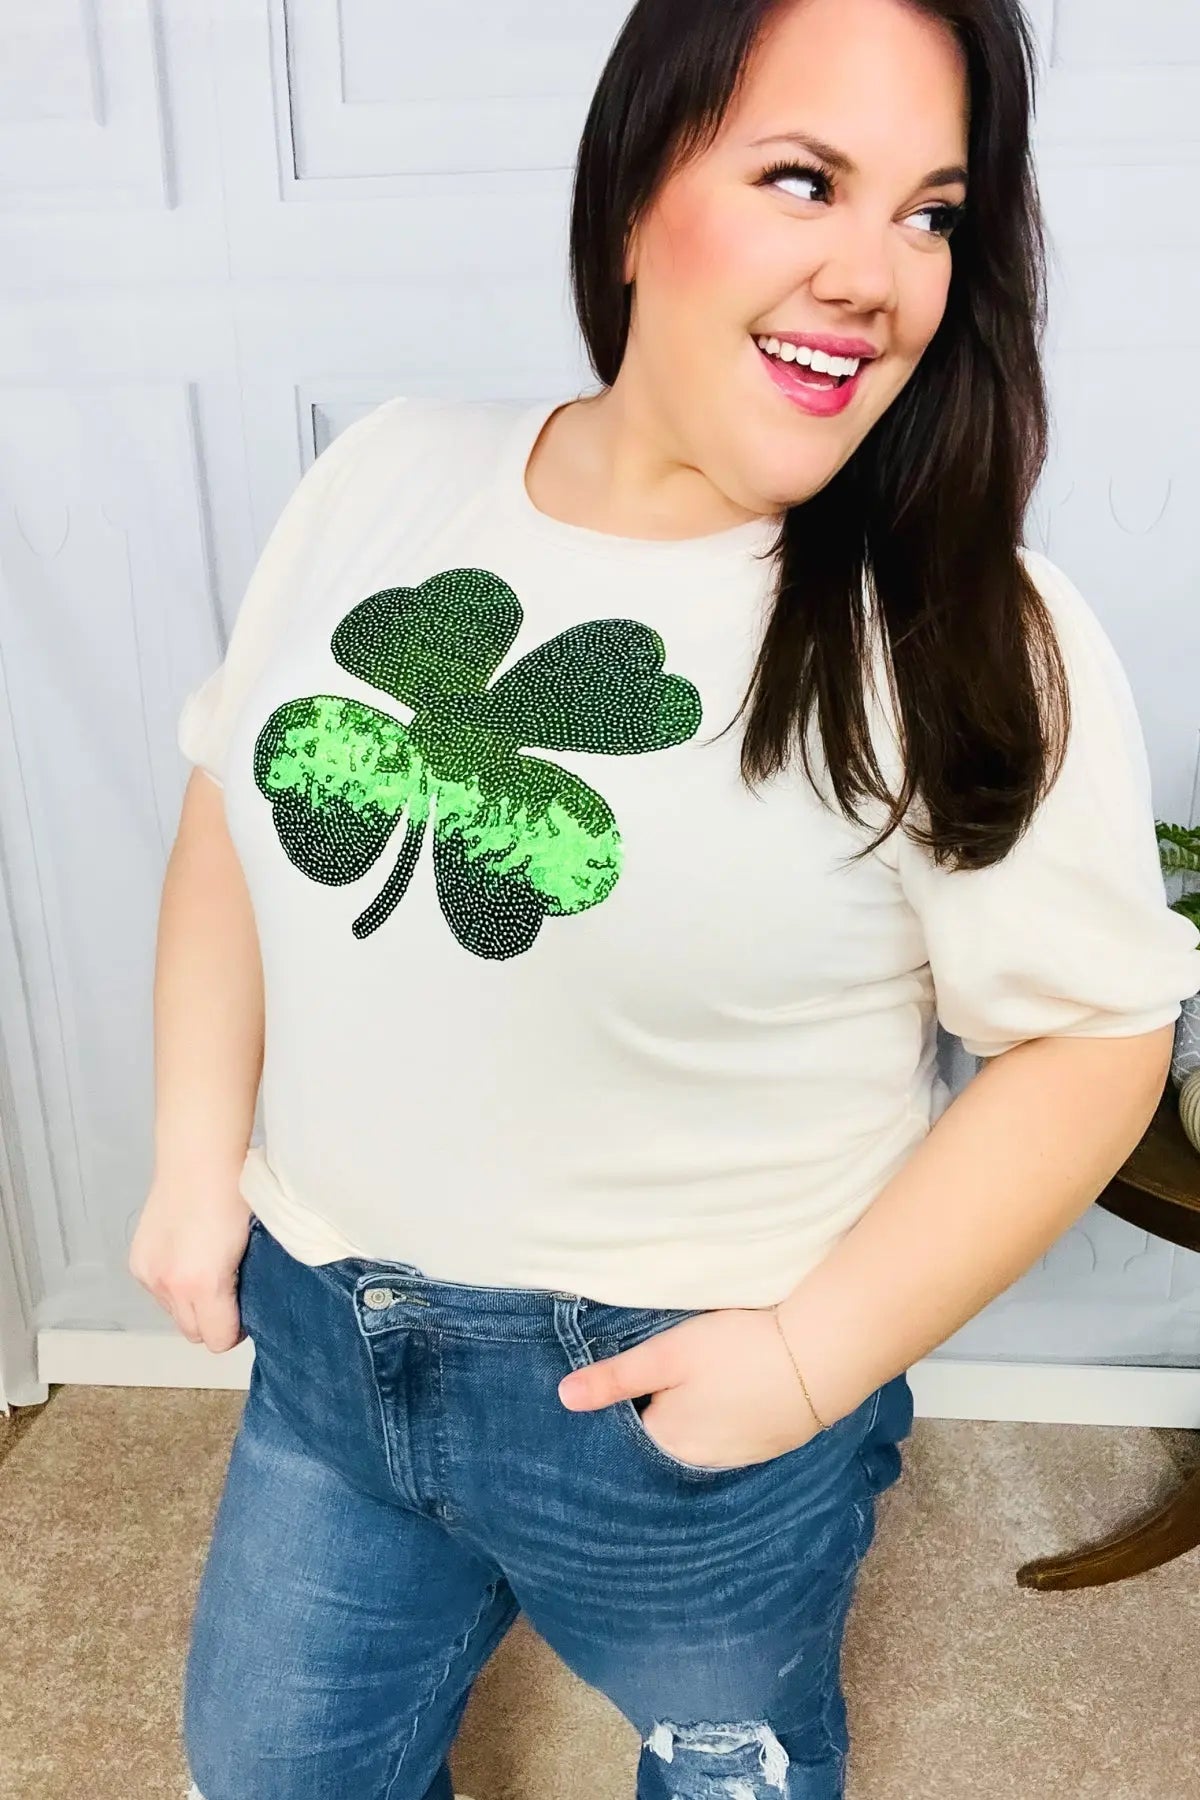 Saint Patty Sequin Clover French Terry Puff Sleeve Top Haptics